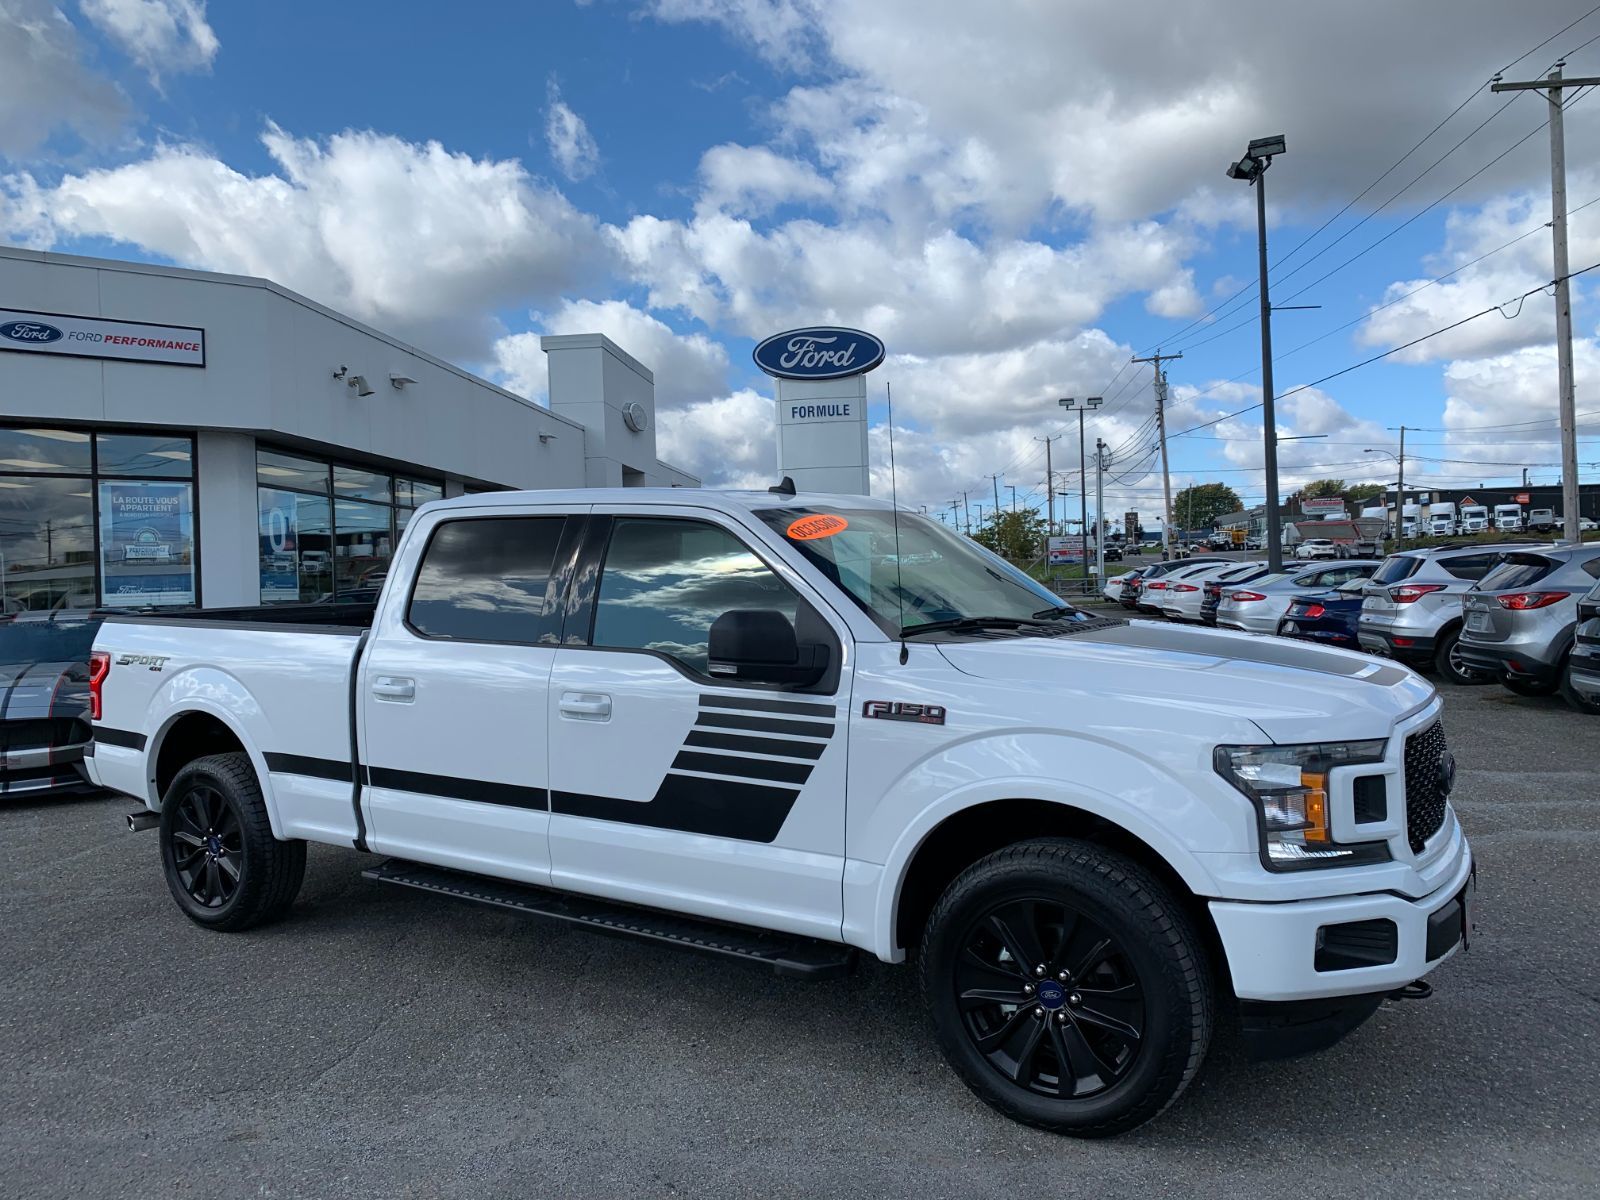 41 HQ Images 2019 Ford F 150 Sport : 2019 Ram 1500 Vs Ford F 150 Truck Comparison Worcester Ma